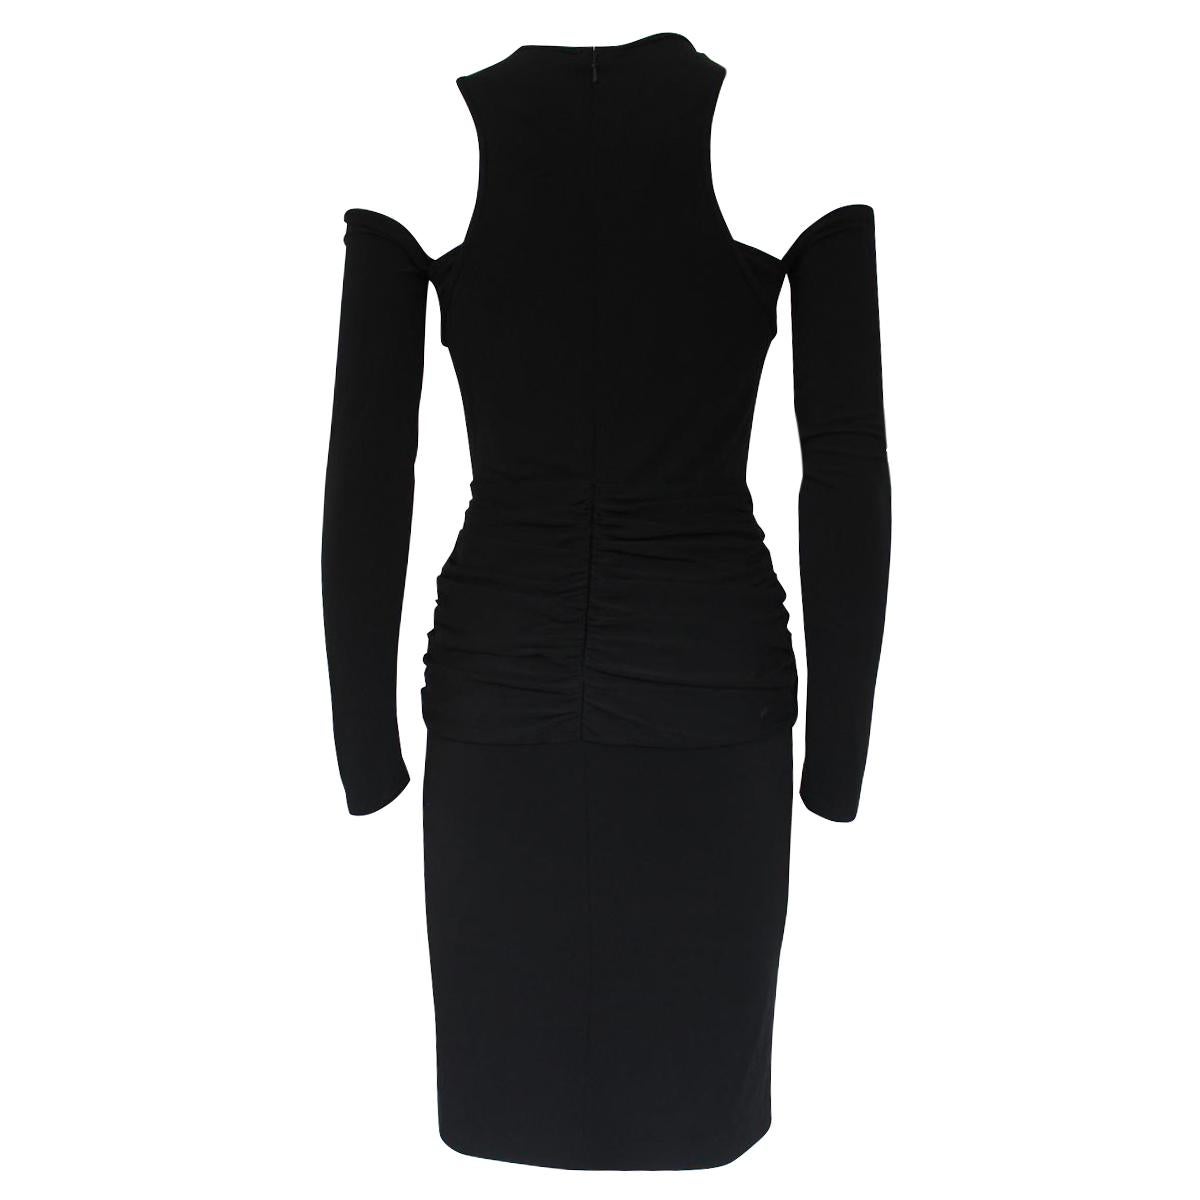 Very chic dress by Yigal Azrouel
Viscose (94%) Elasthane
Black color
Long sleeves
Stretch fabric
Total length cm 95 (37.4 inches)
American size 4,italian size 40
Worldwide express shipping included in the price !